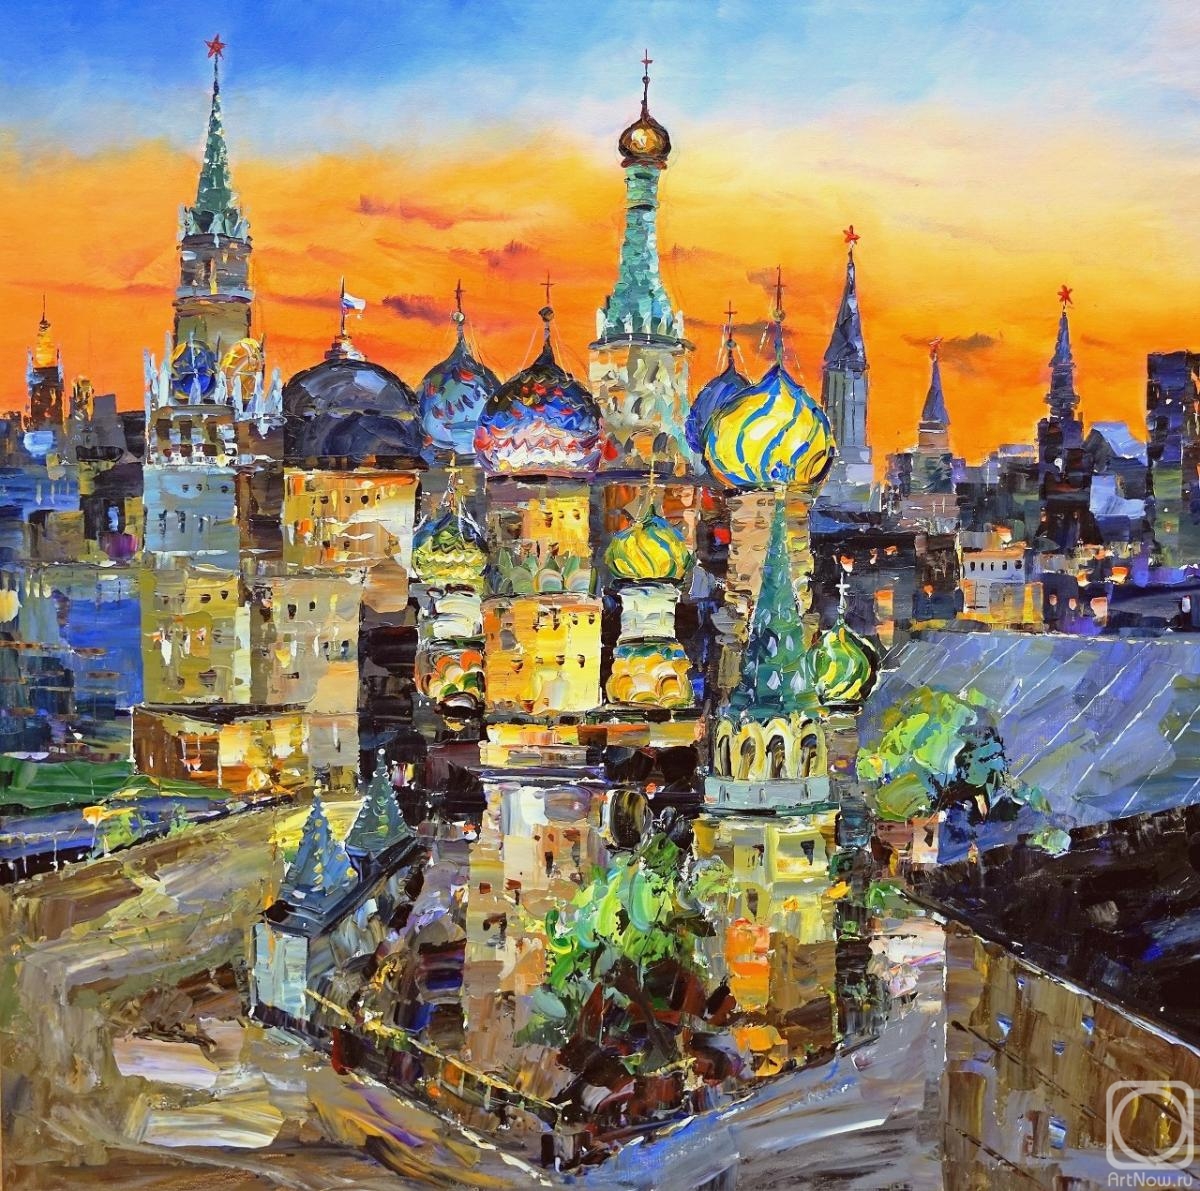 Rodries Jose. St. Basil's Cathedral on red square N 2